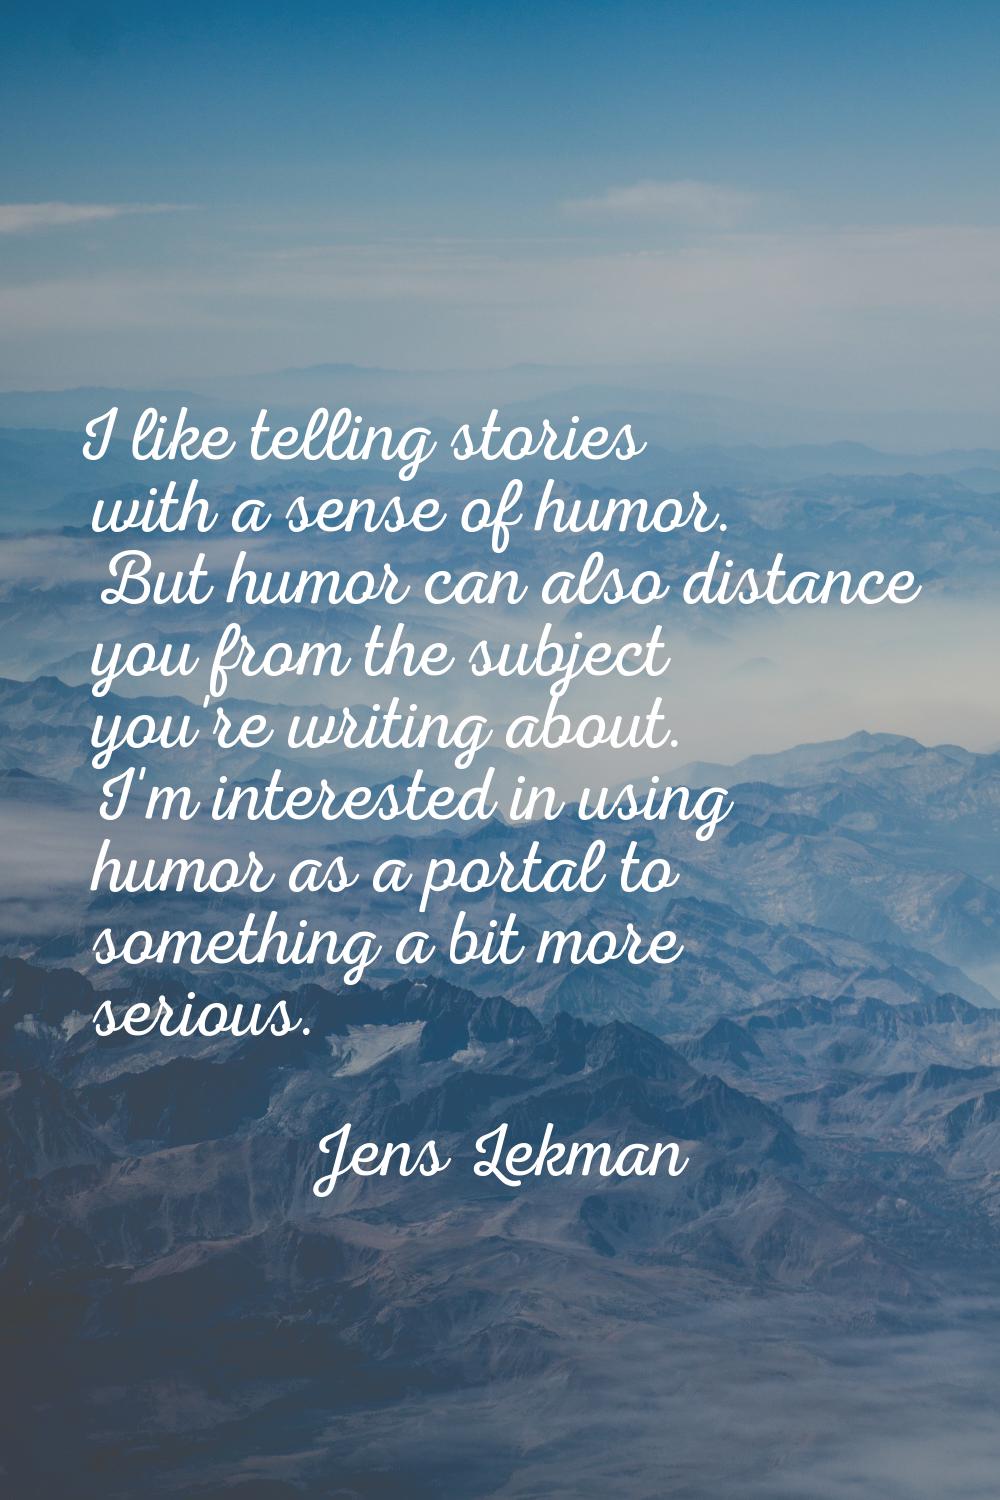 I like telling stories with a sense of humor. But humor can also distance you from the subject you'